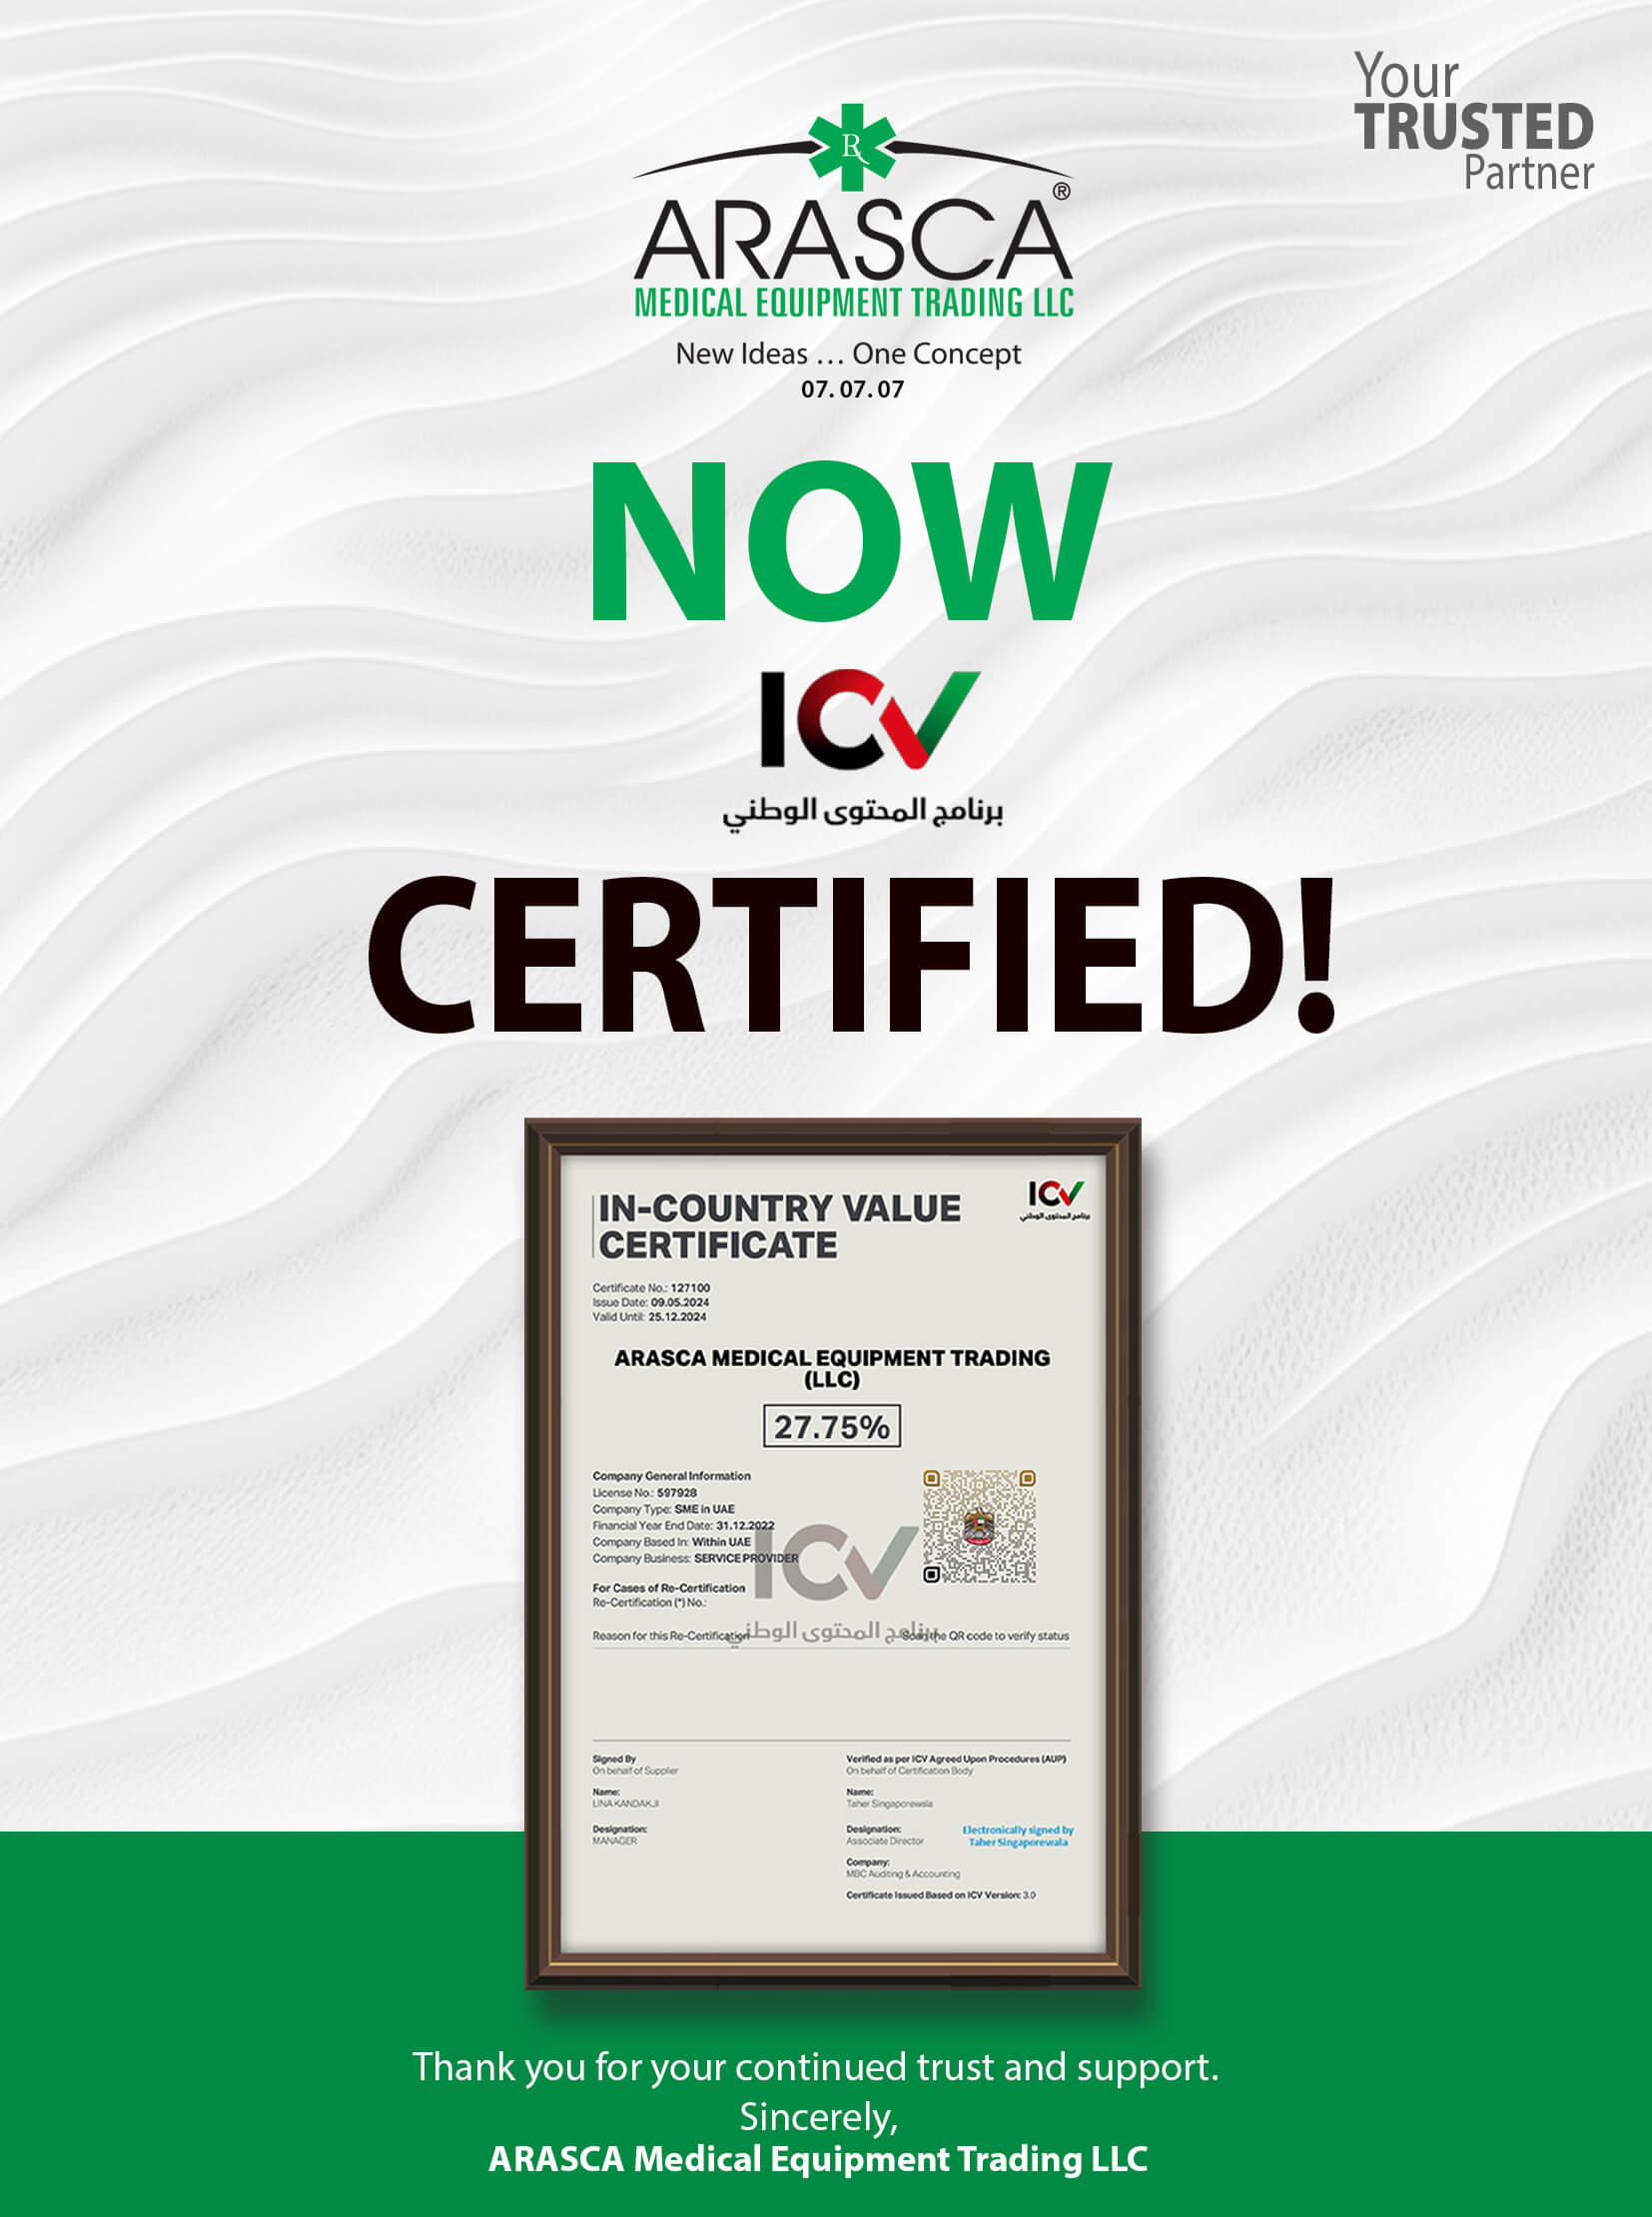 Your Trusted Partner for Growth, Now ICV Certified!